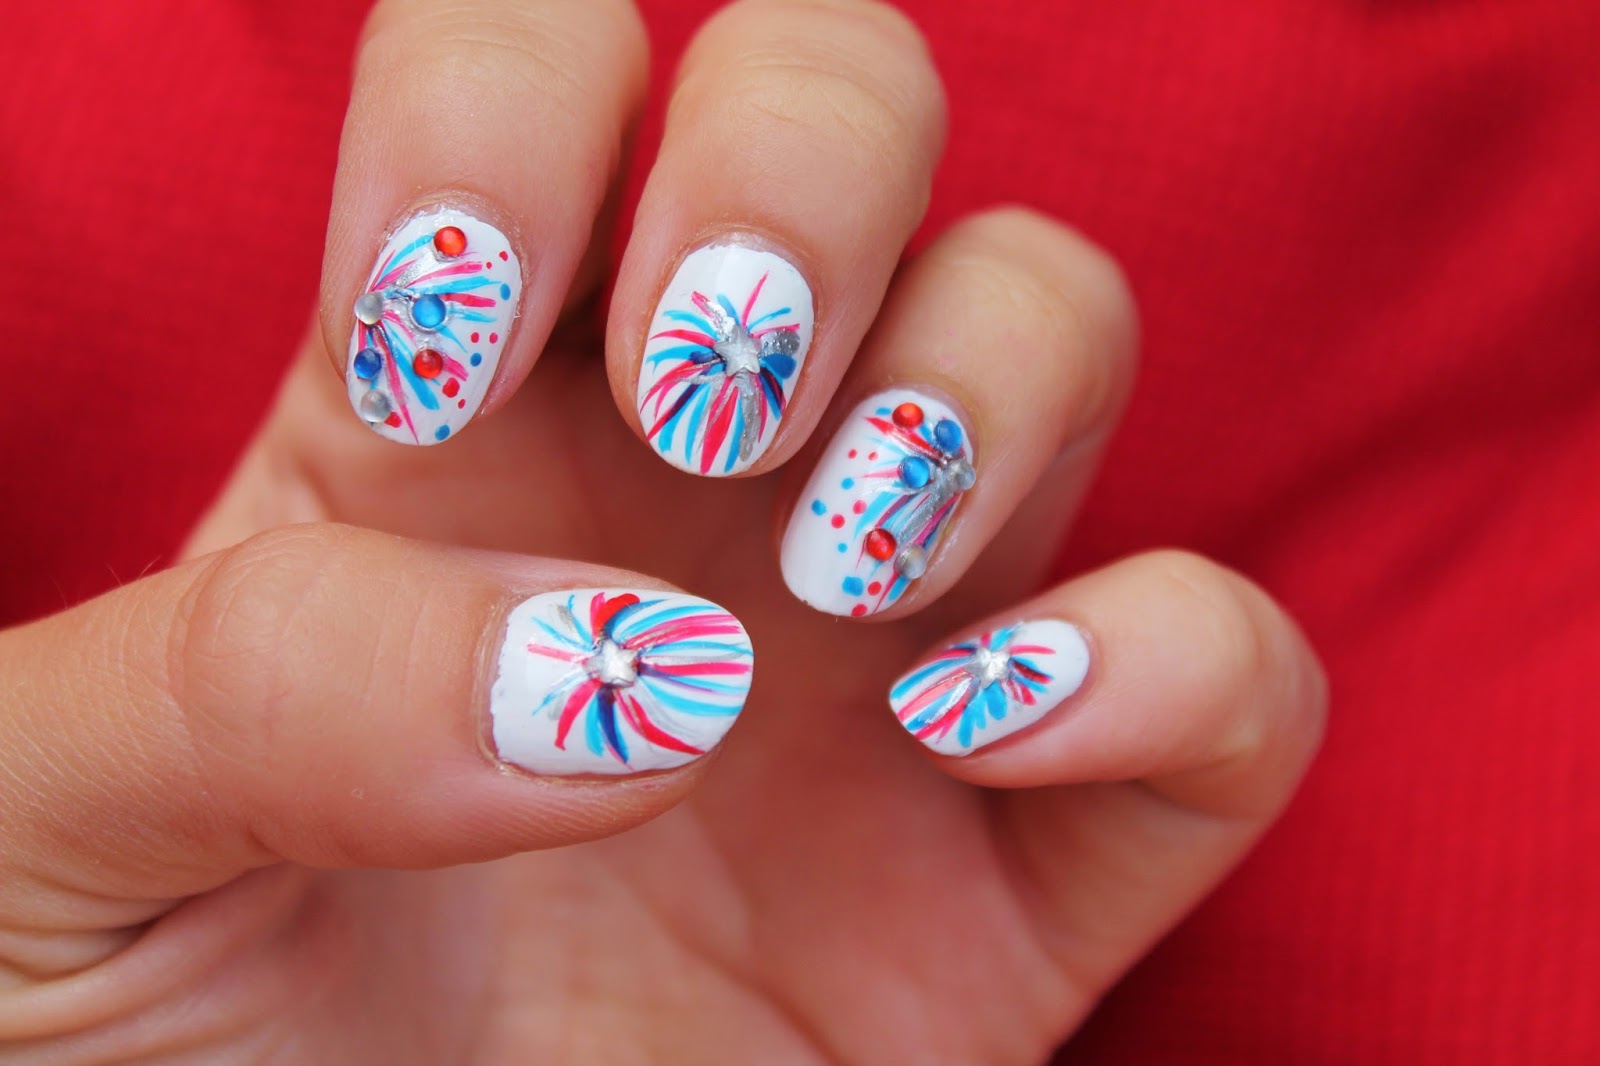 1. Patriotic Nail Art Ideas for the Fourth of July - wide 3